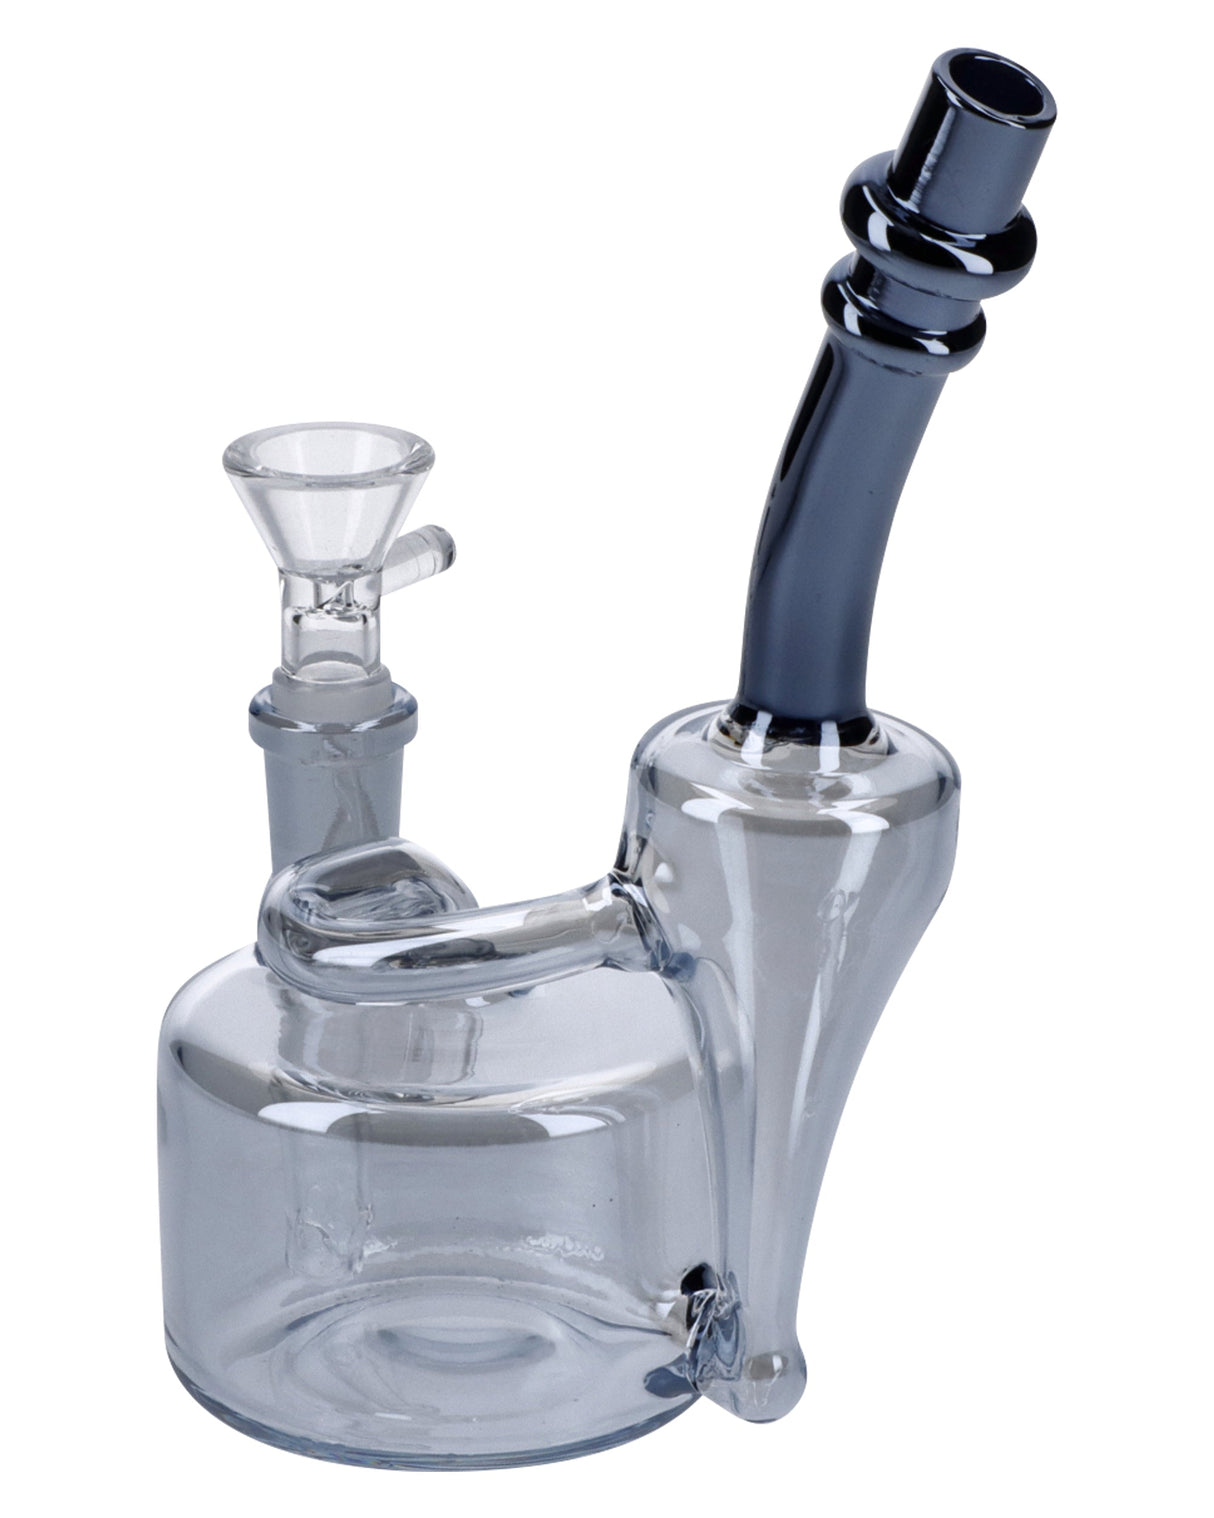 Valiant Painting Bubbler, 6in with Quartz Bowl, Portable Black & Clear Glass, Side View